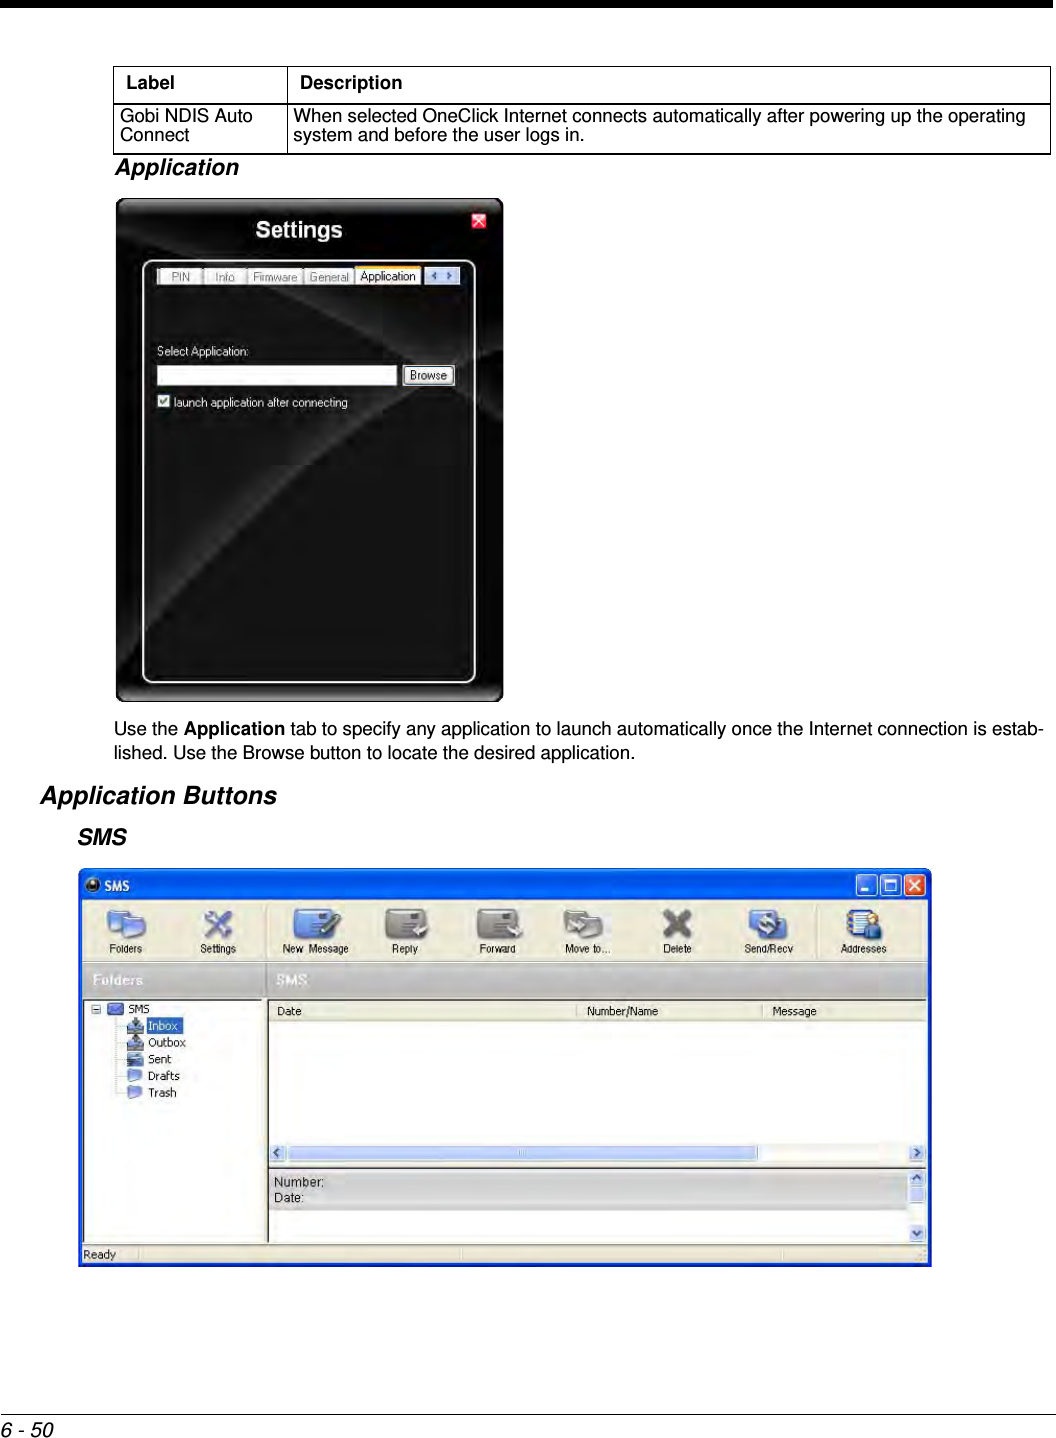 6 - 50ApplicationUse the Application tab to specify any application to launch automatically once the Internet connection is estab-lished. Use the Browse button to locate the desired application.Application ButtonsSMSGobi NDIS Auto Connect When selected OneClick Internet connects automatically after powering up the operating system and before the user logs in.Label Description